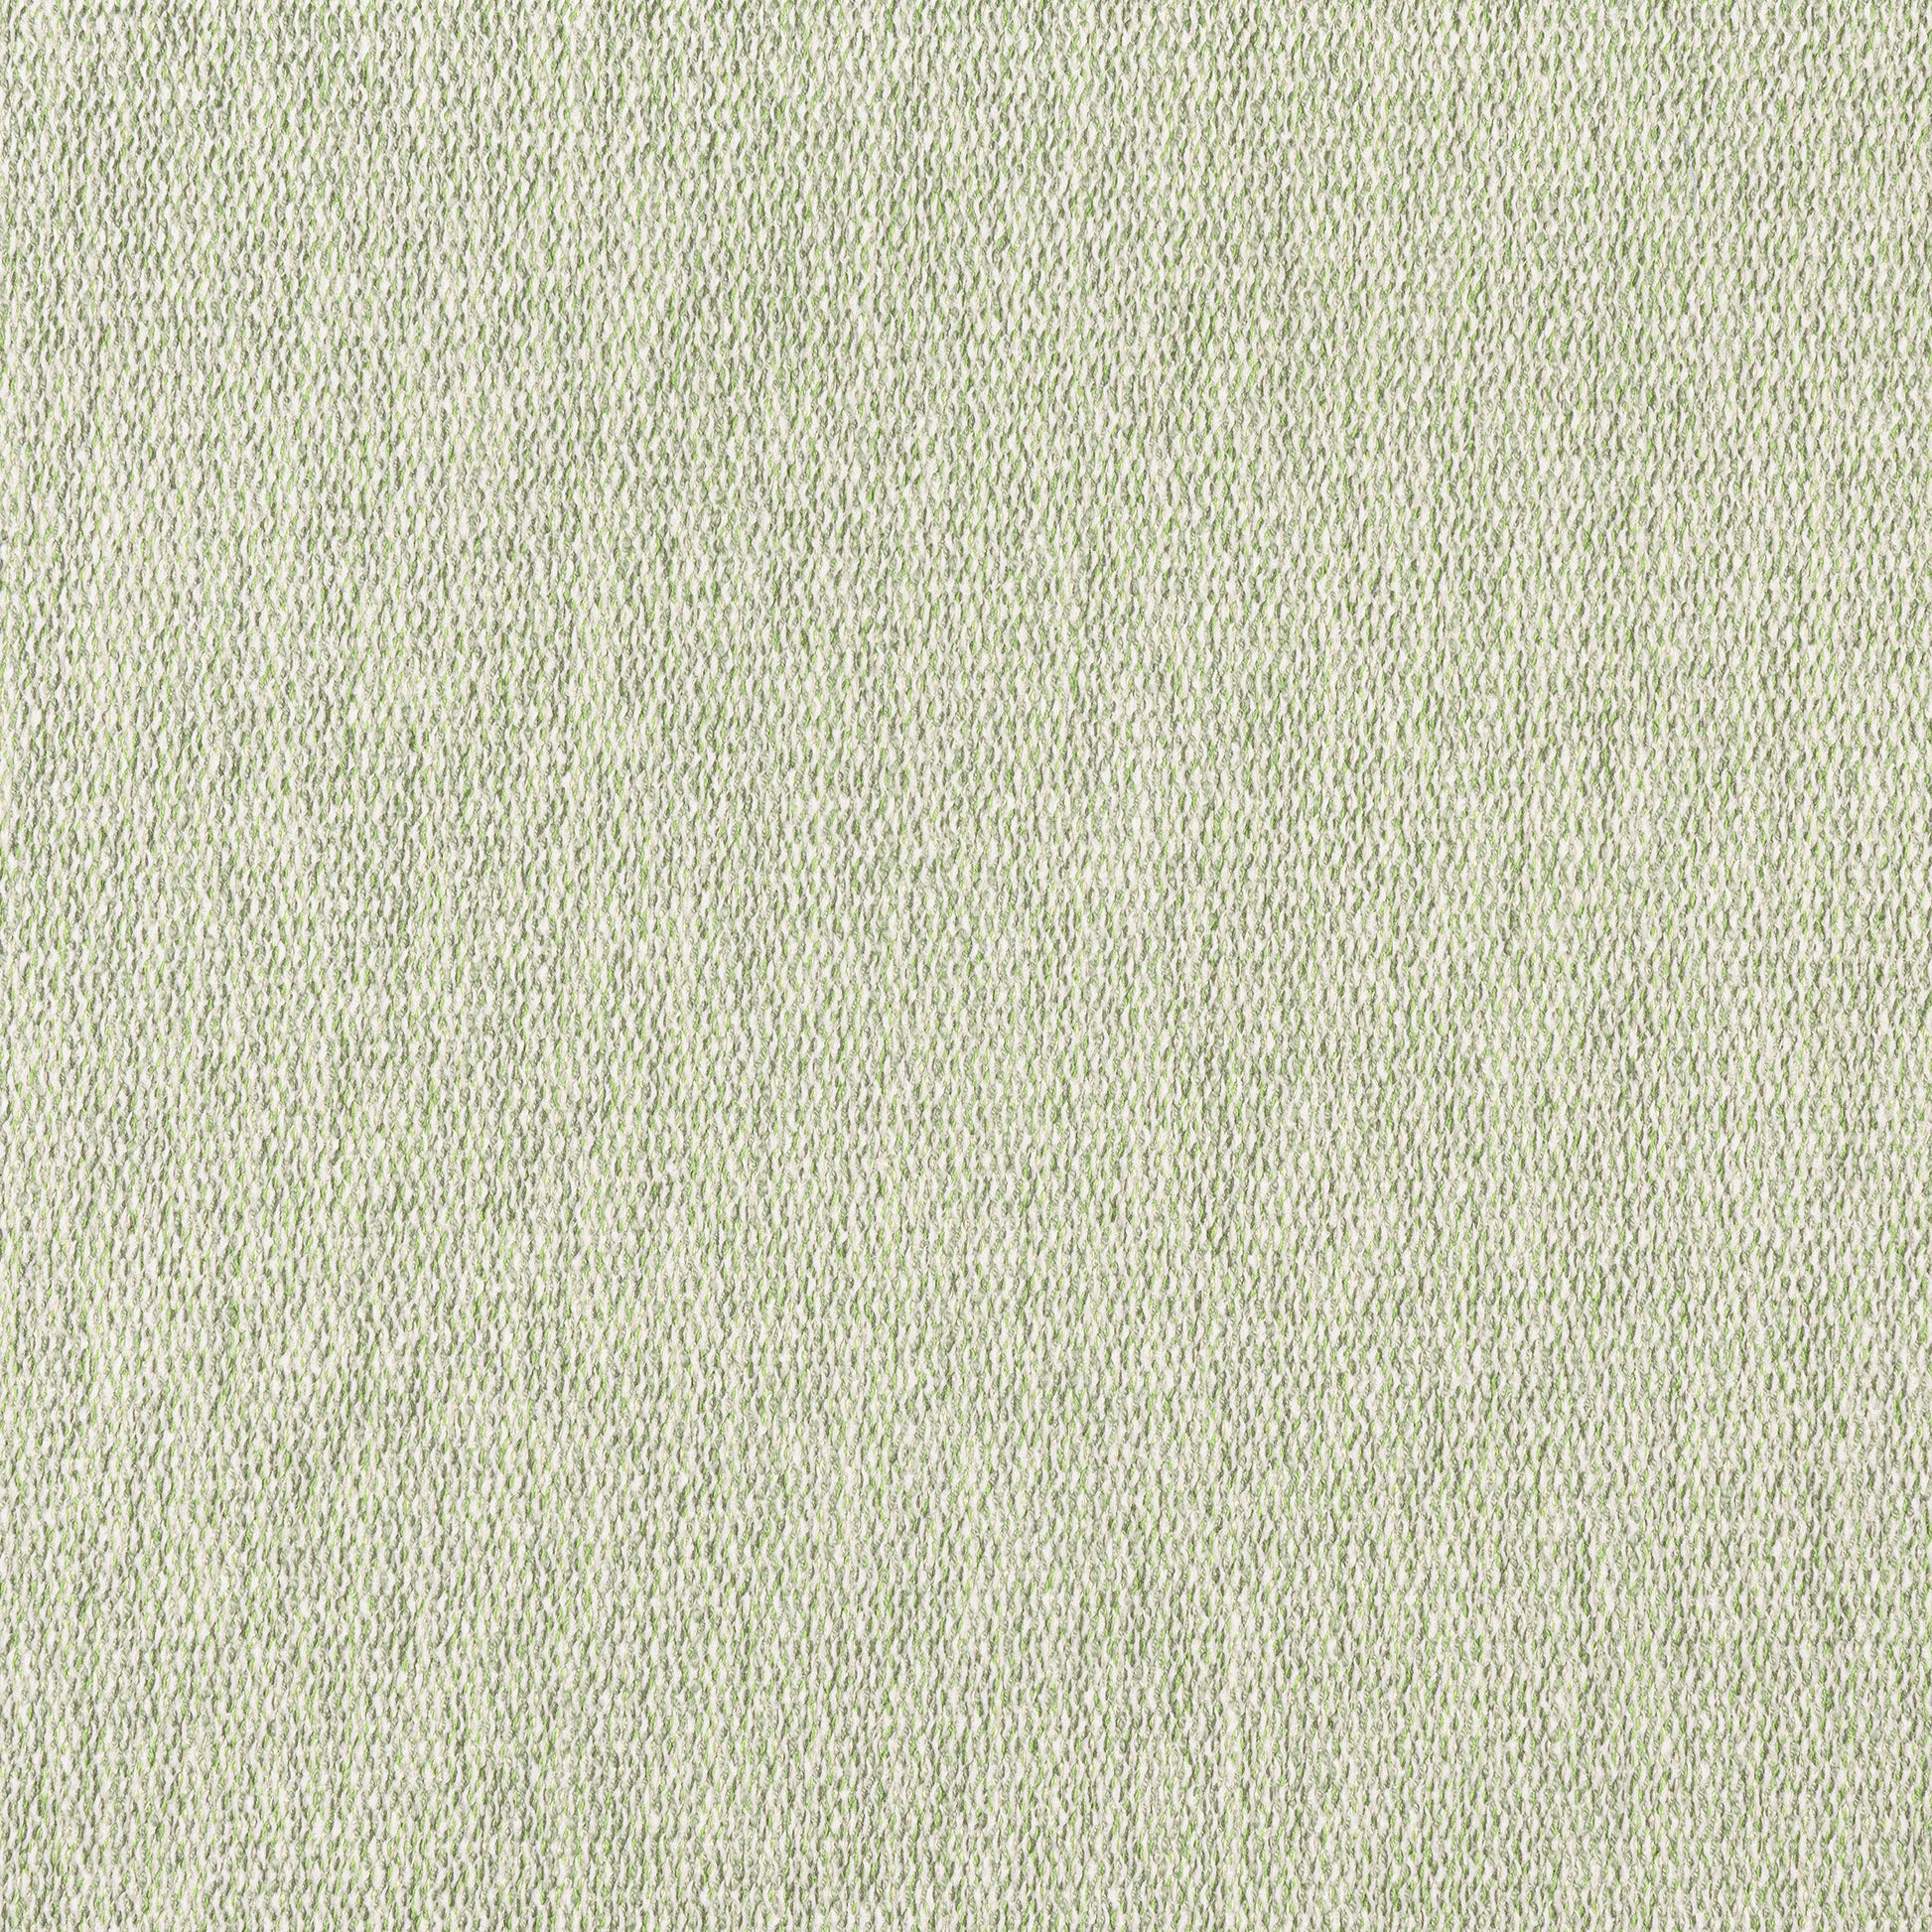 Purchase Thibaut Fabric Pattern W8784 pattern name Arroyo color Green